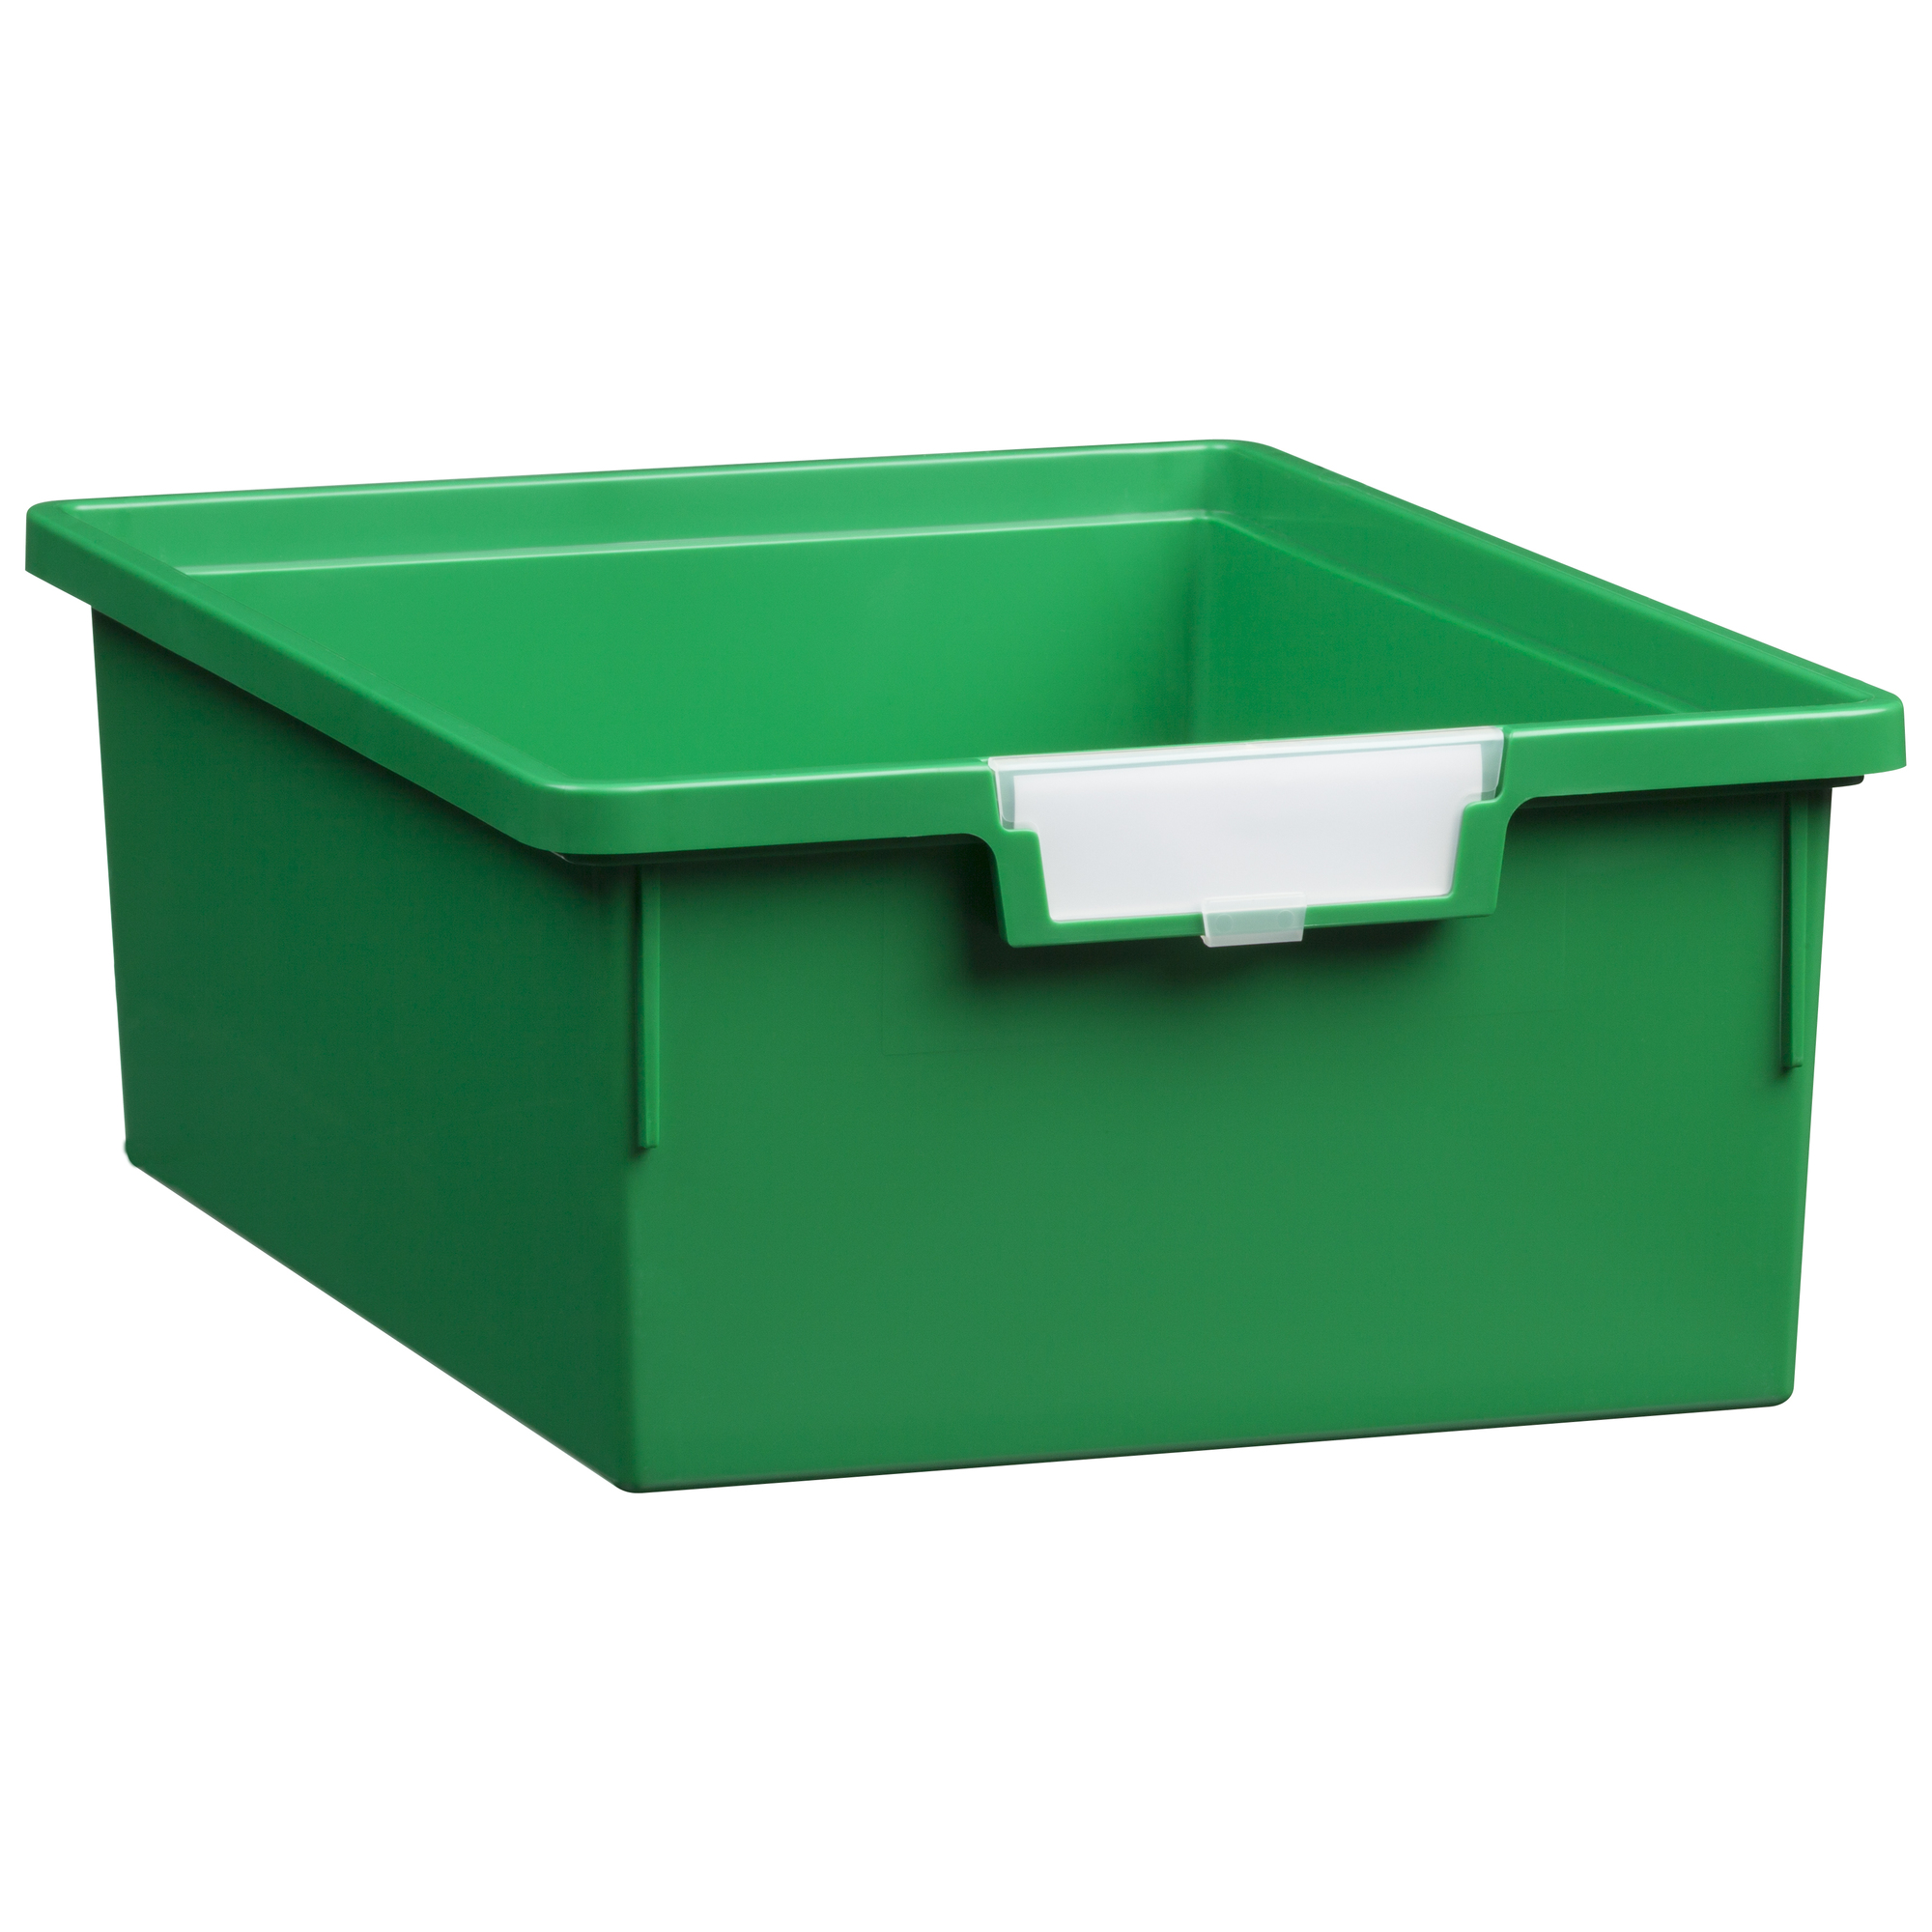 Certwood StorWerks, Slim Line 6Inch Tray in Primary Green-3PK, Included (qty.) 3 Height 6 in, Model CE1952PG3